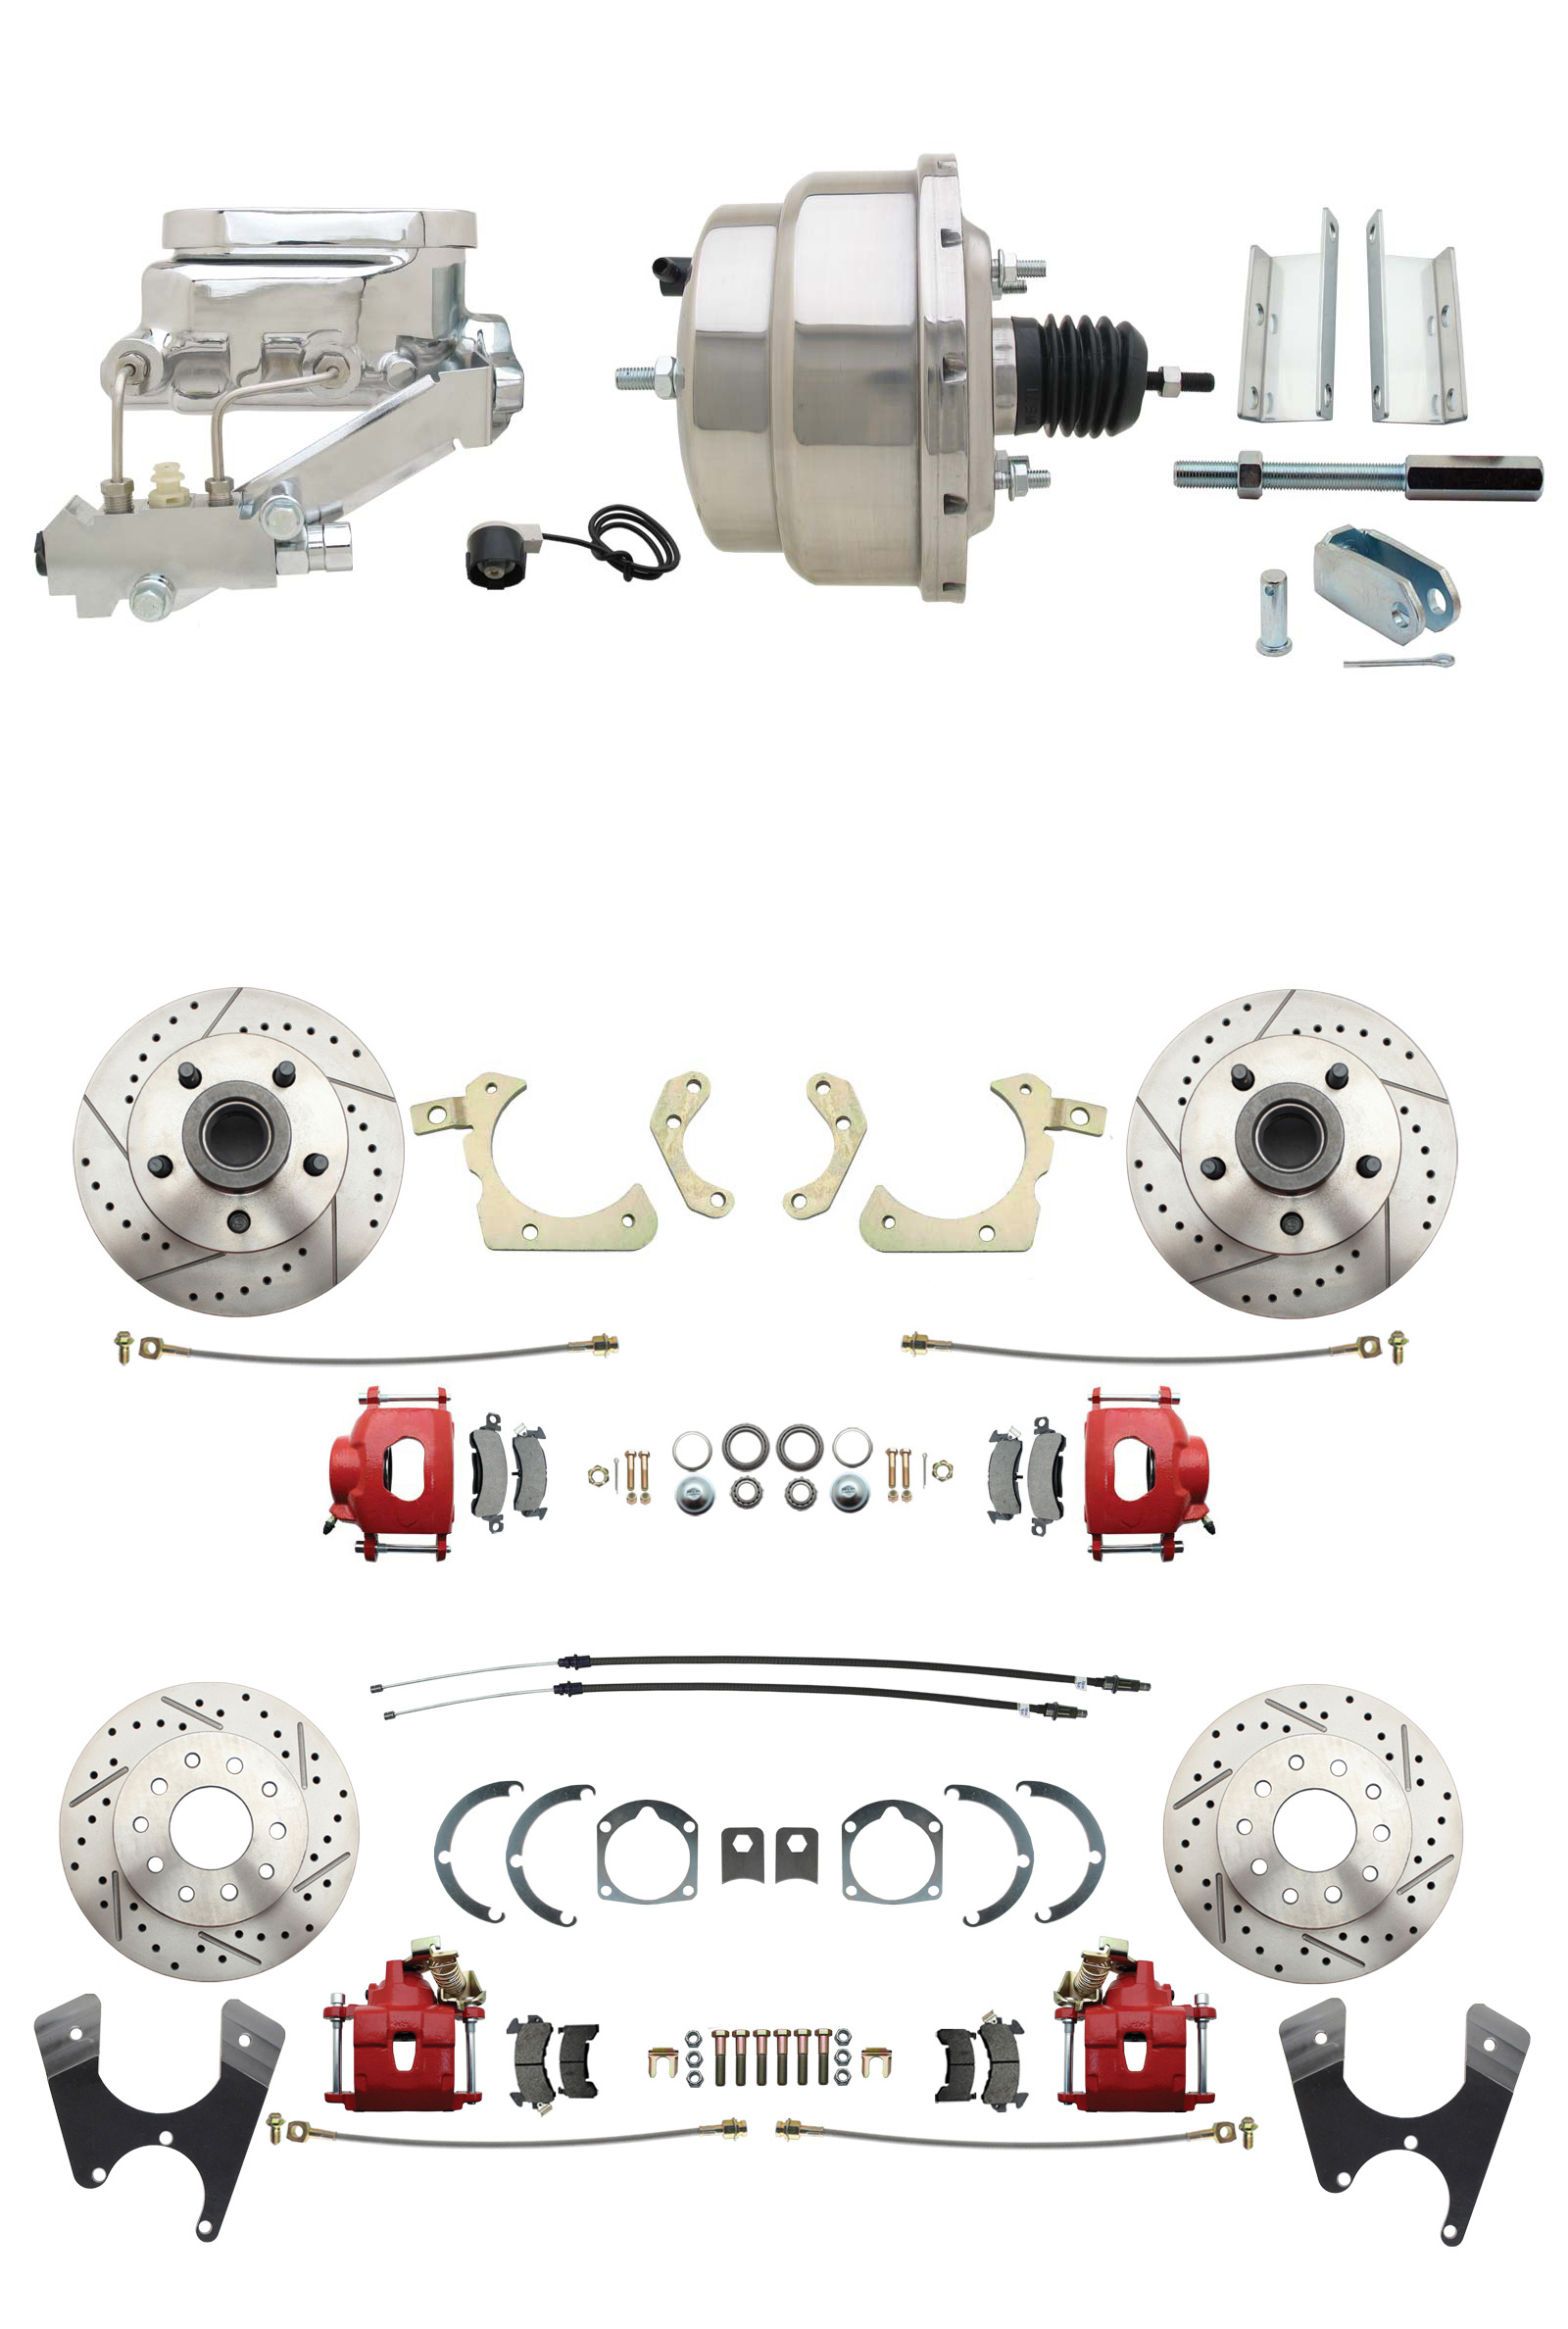 1955-1958 GM Full Size Front & Rear Power Disc Brake Kit Red Powder Coated Calipers Drilled/Slotted Rotors (Impala, Bel Air, Biscayne) & 8 Dual Chrome Booster Conversion Kit W/ Flat Top Chrome Master Cylinder Left Mount